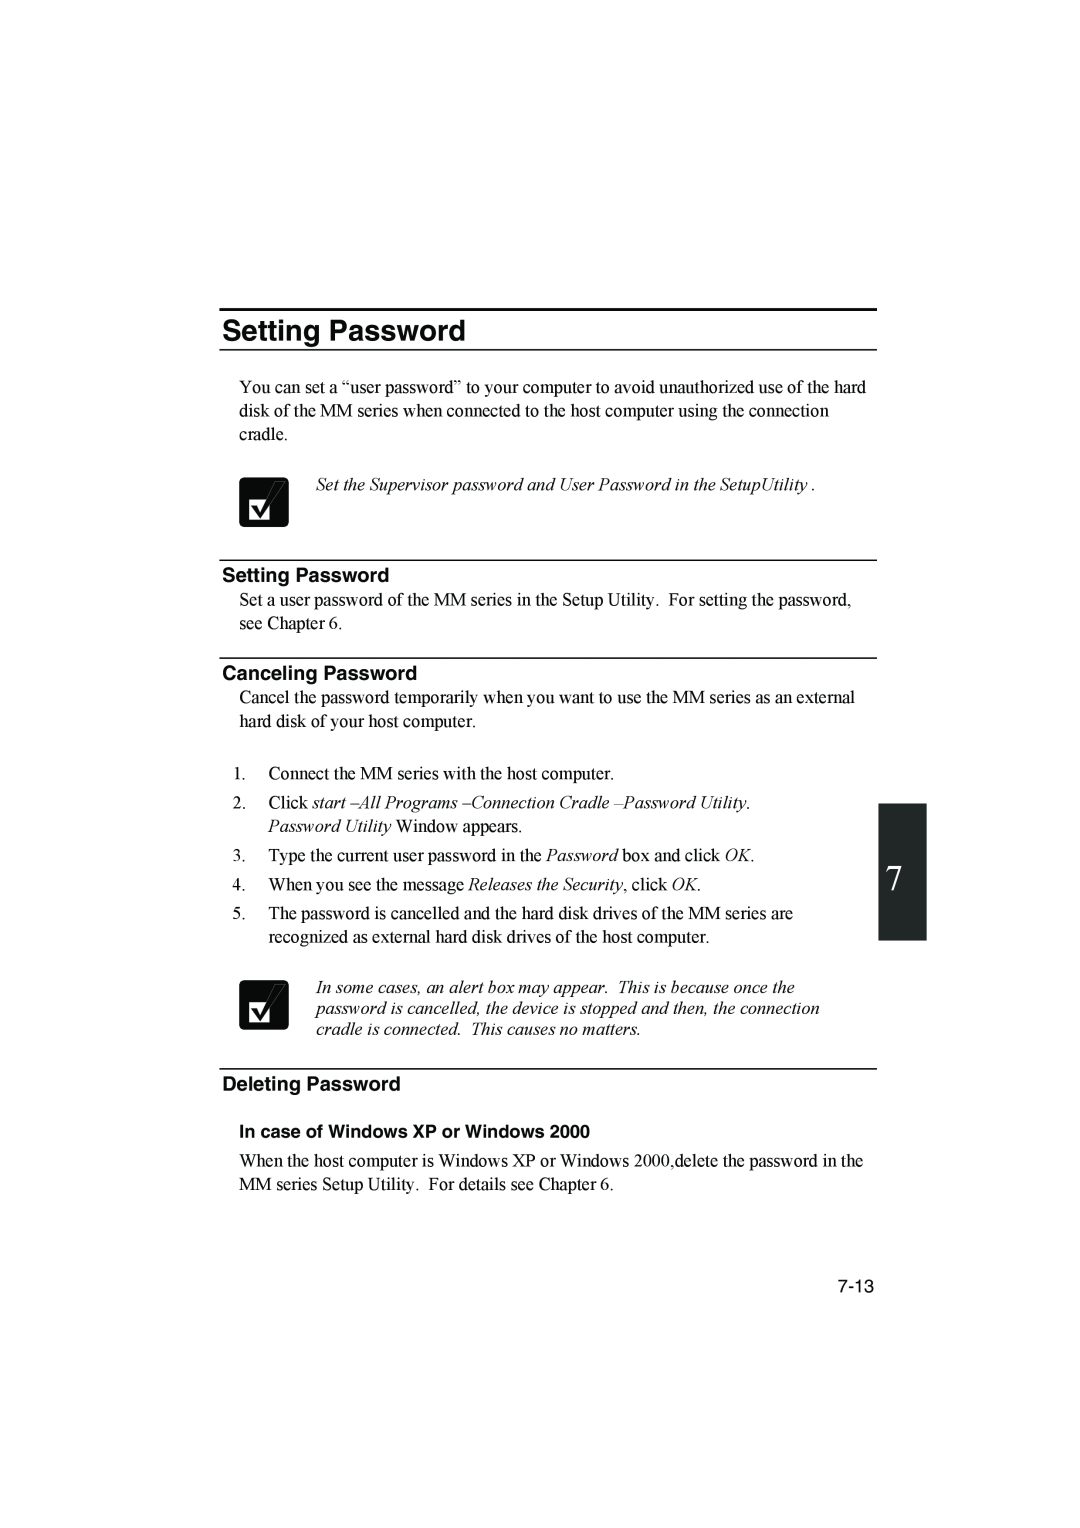 Sharp PC-MM1 manual Setting Password, Canceling Password, In case of Windows XP or Windows, Deleting Password 